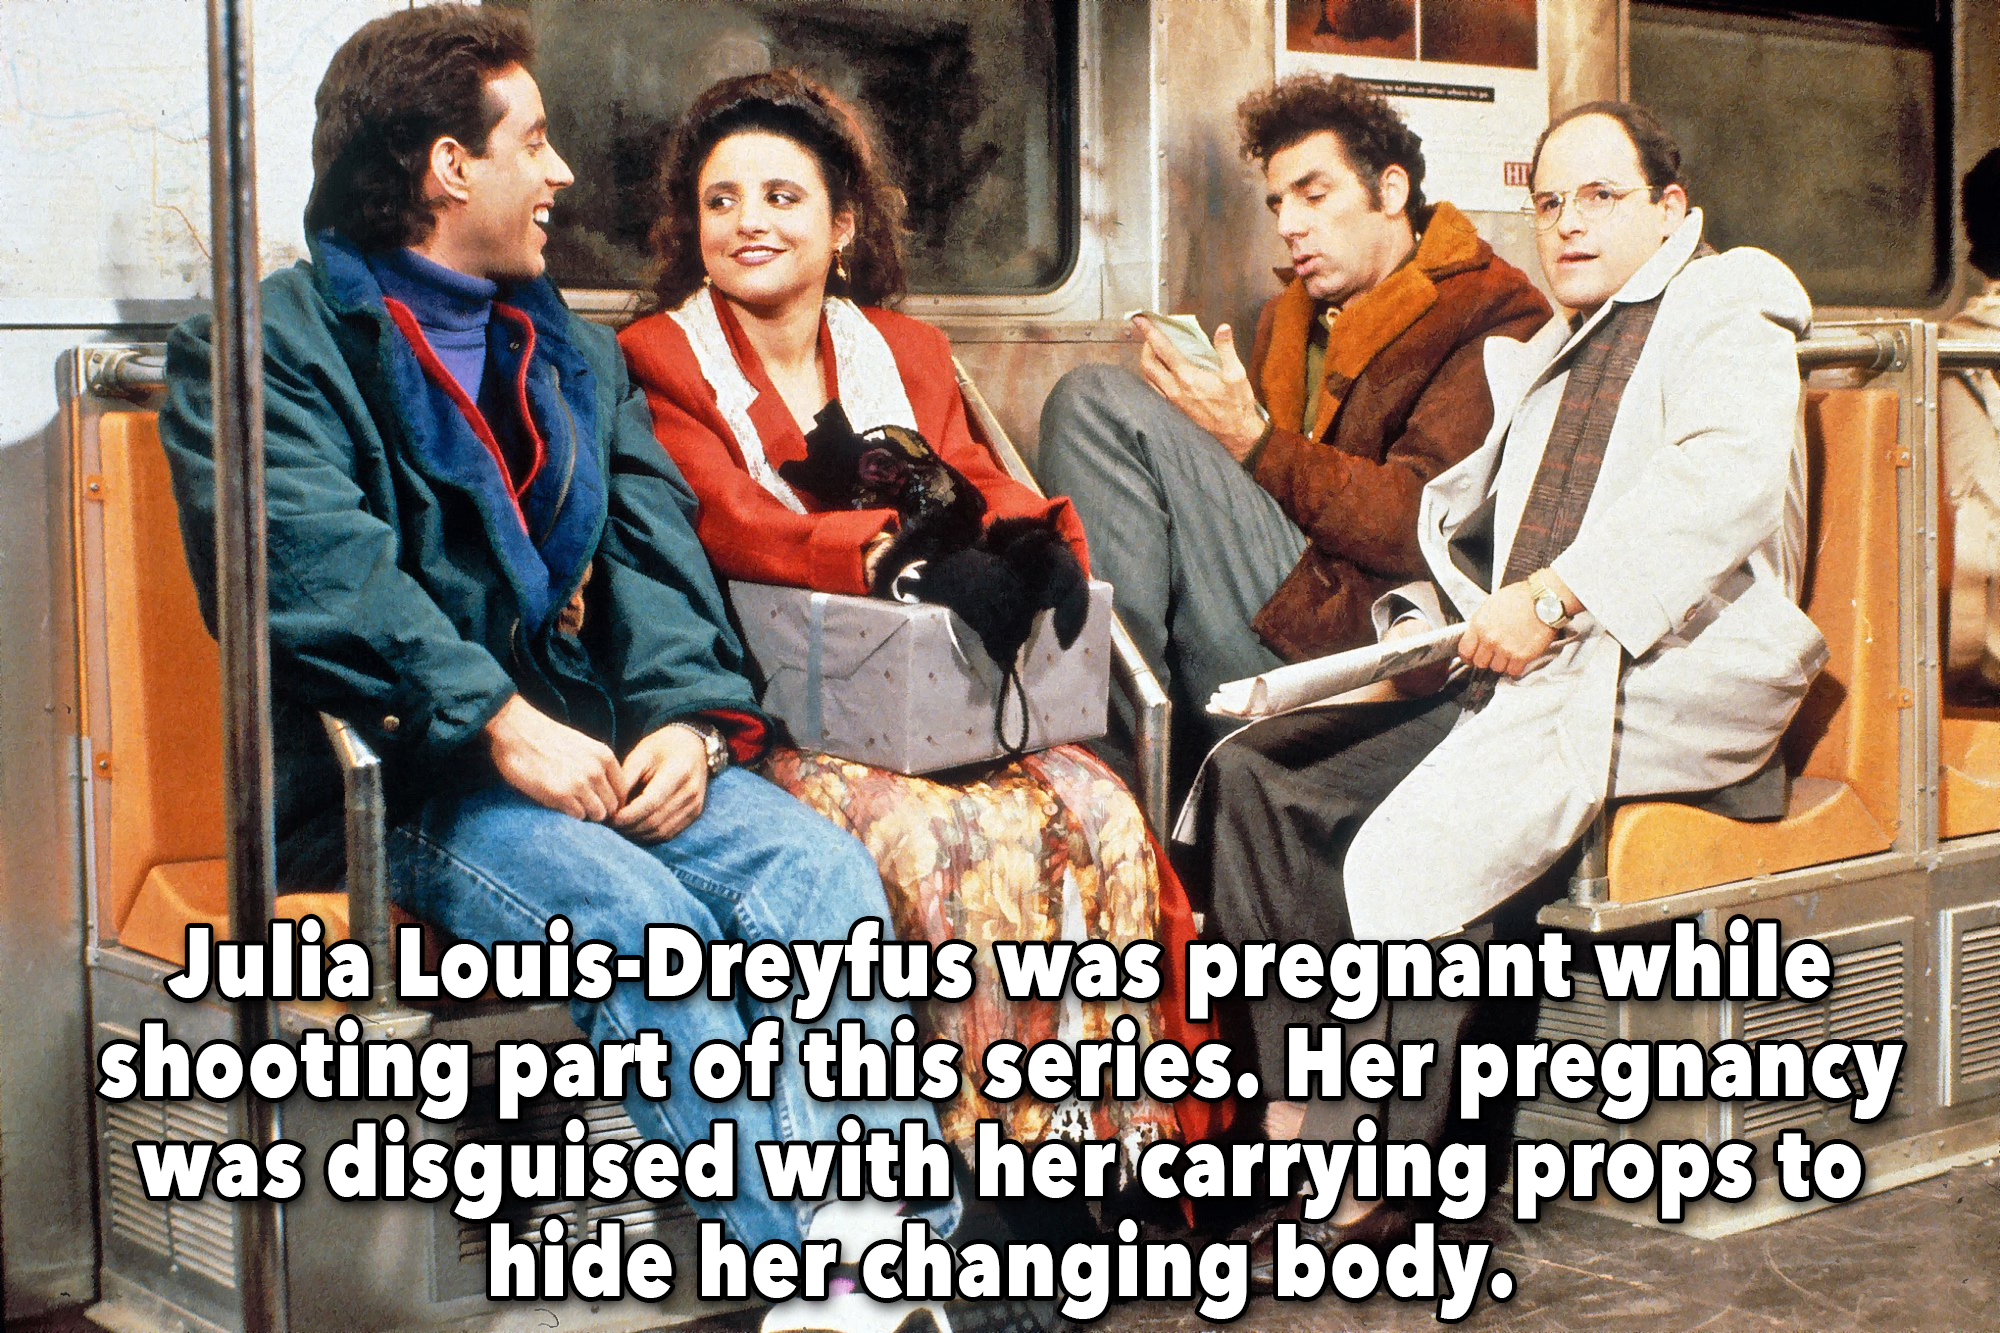 18 Interesting facts about Seinfeld